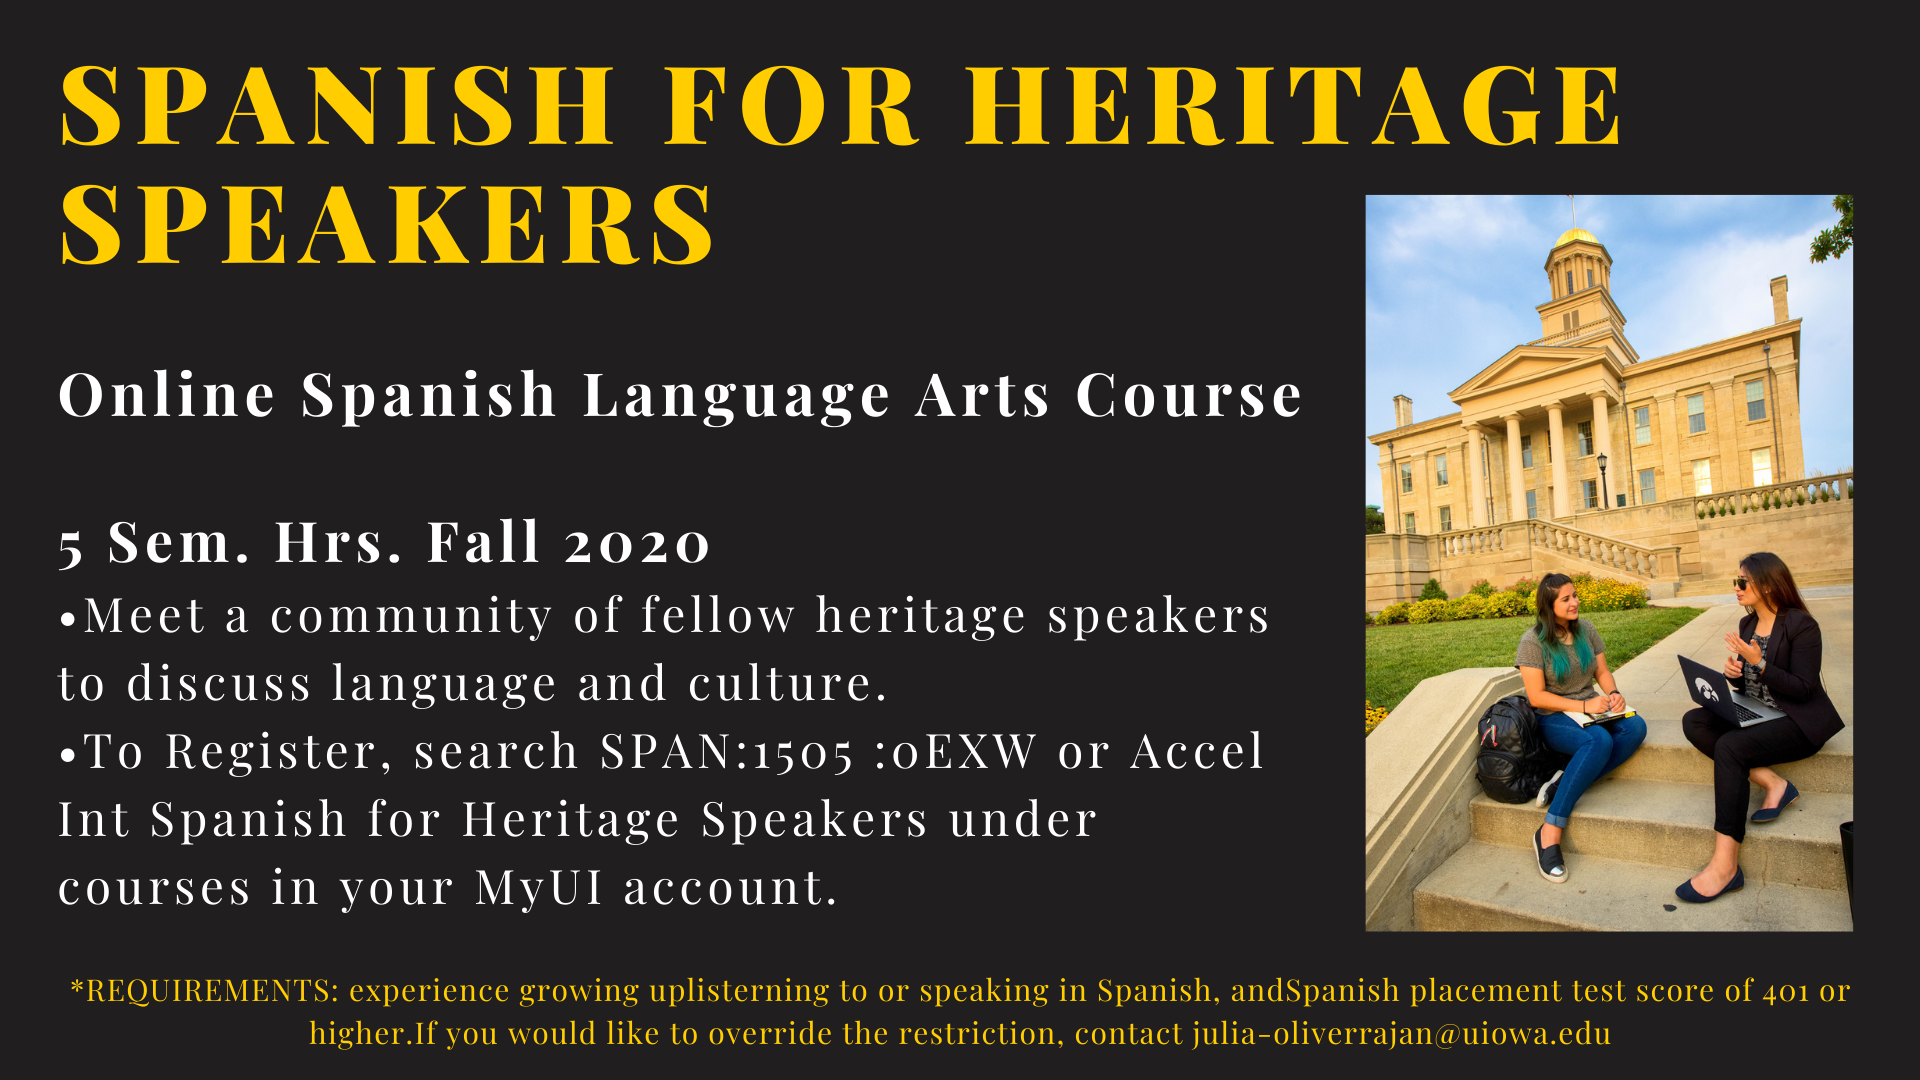 spanish for heritage speakers online spanish language arts course 5 semester hours offered in Fall 2020